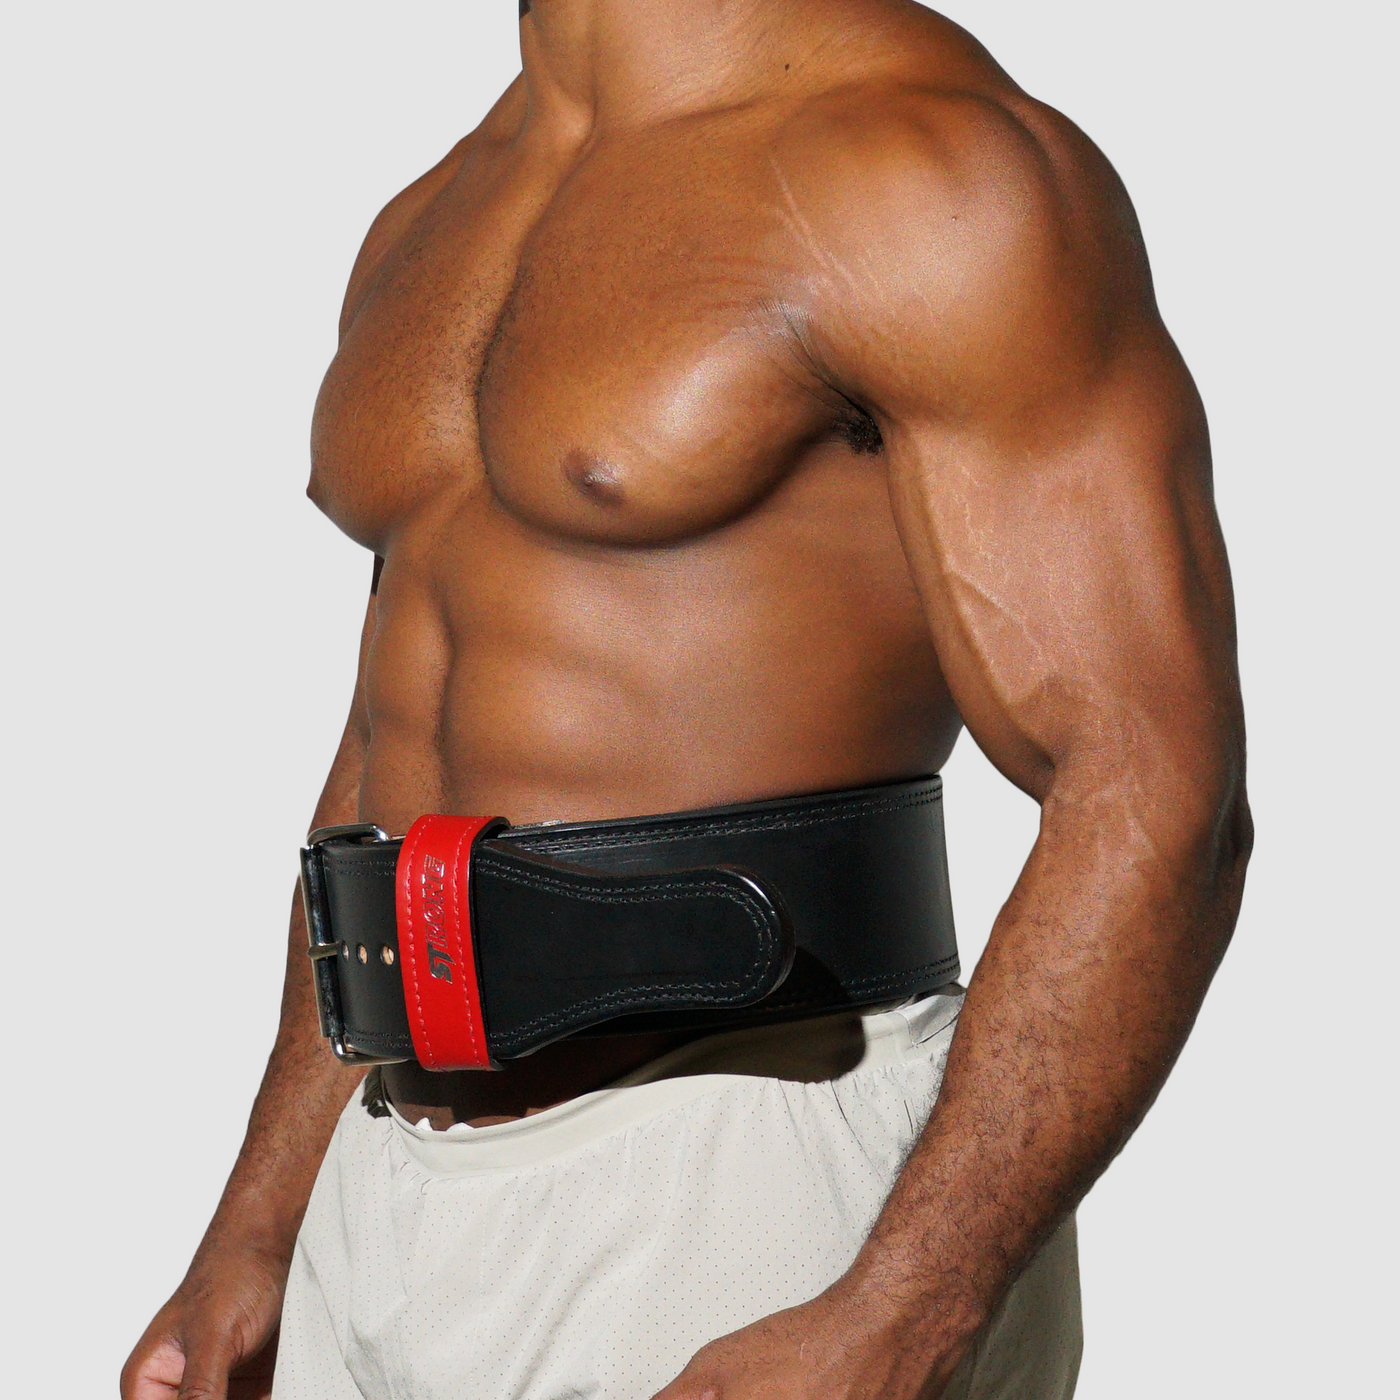 Strong Man Gym Belt Weight Lifting Fitness Brace Support Training